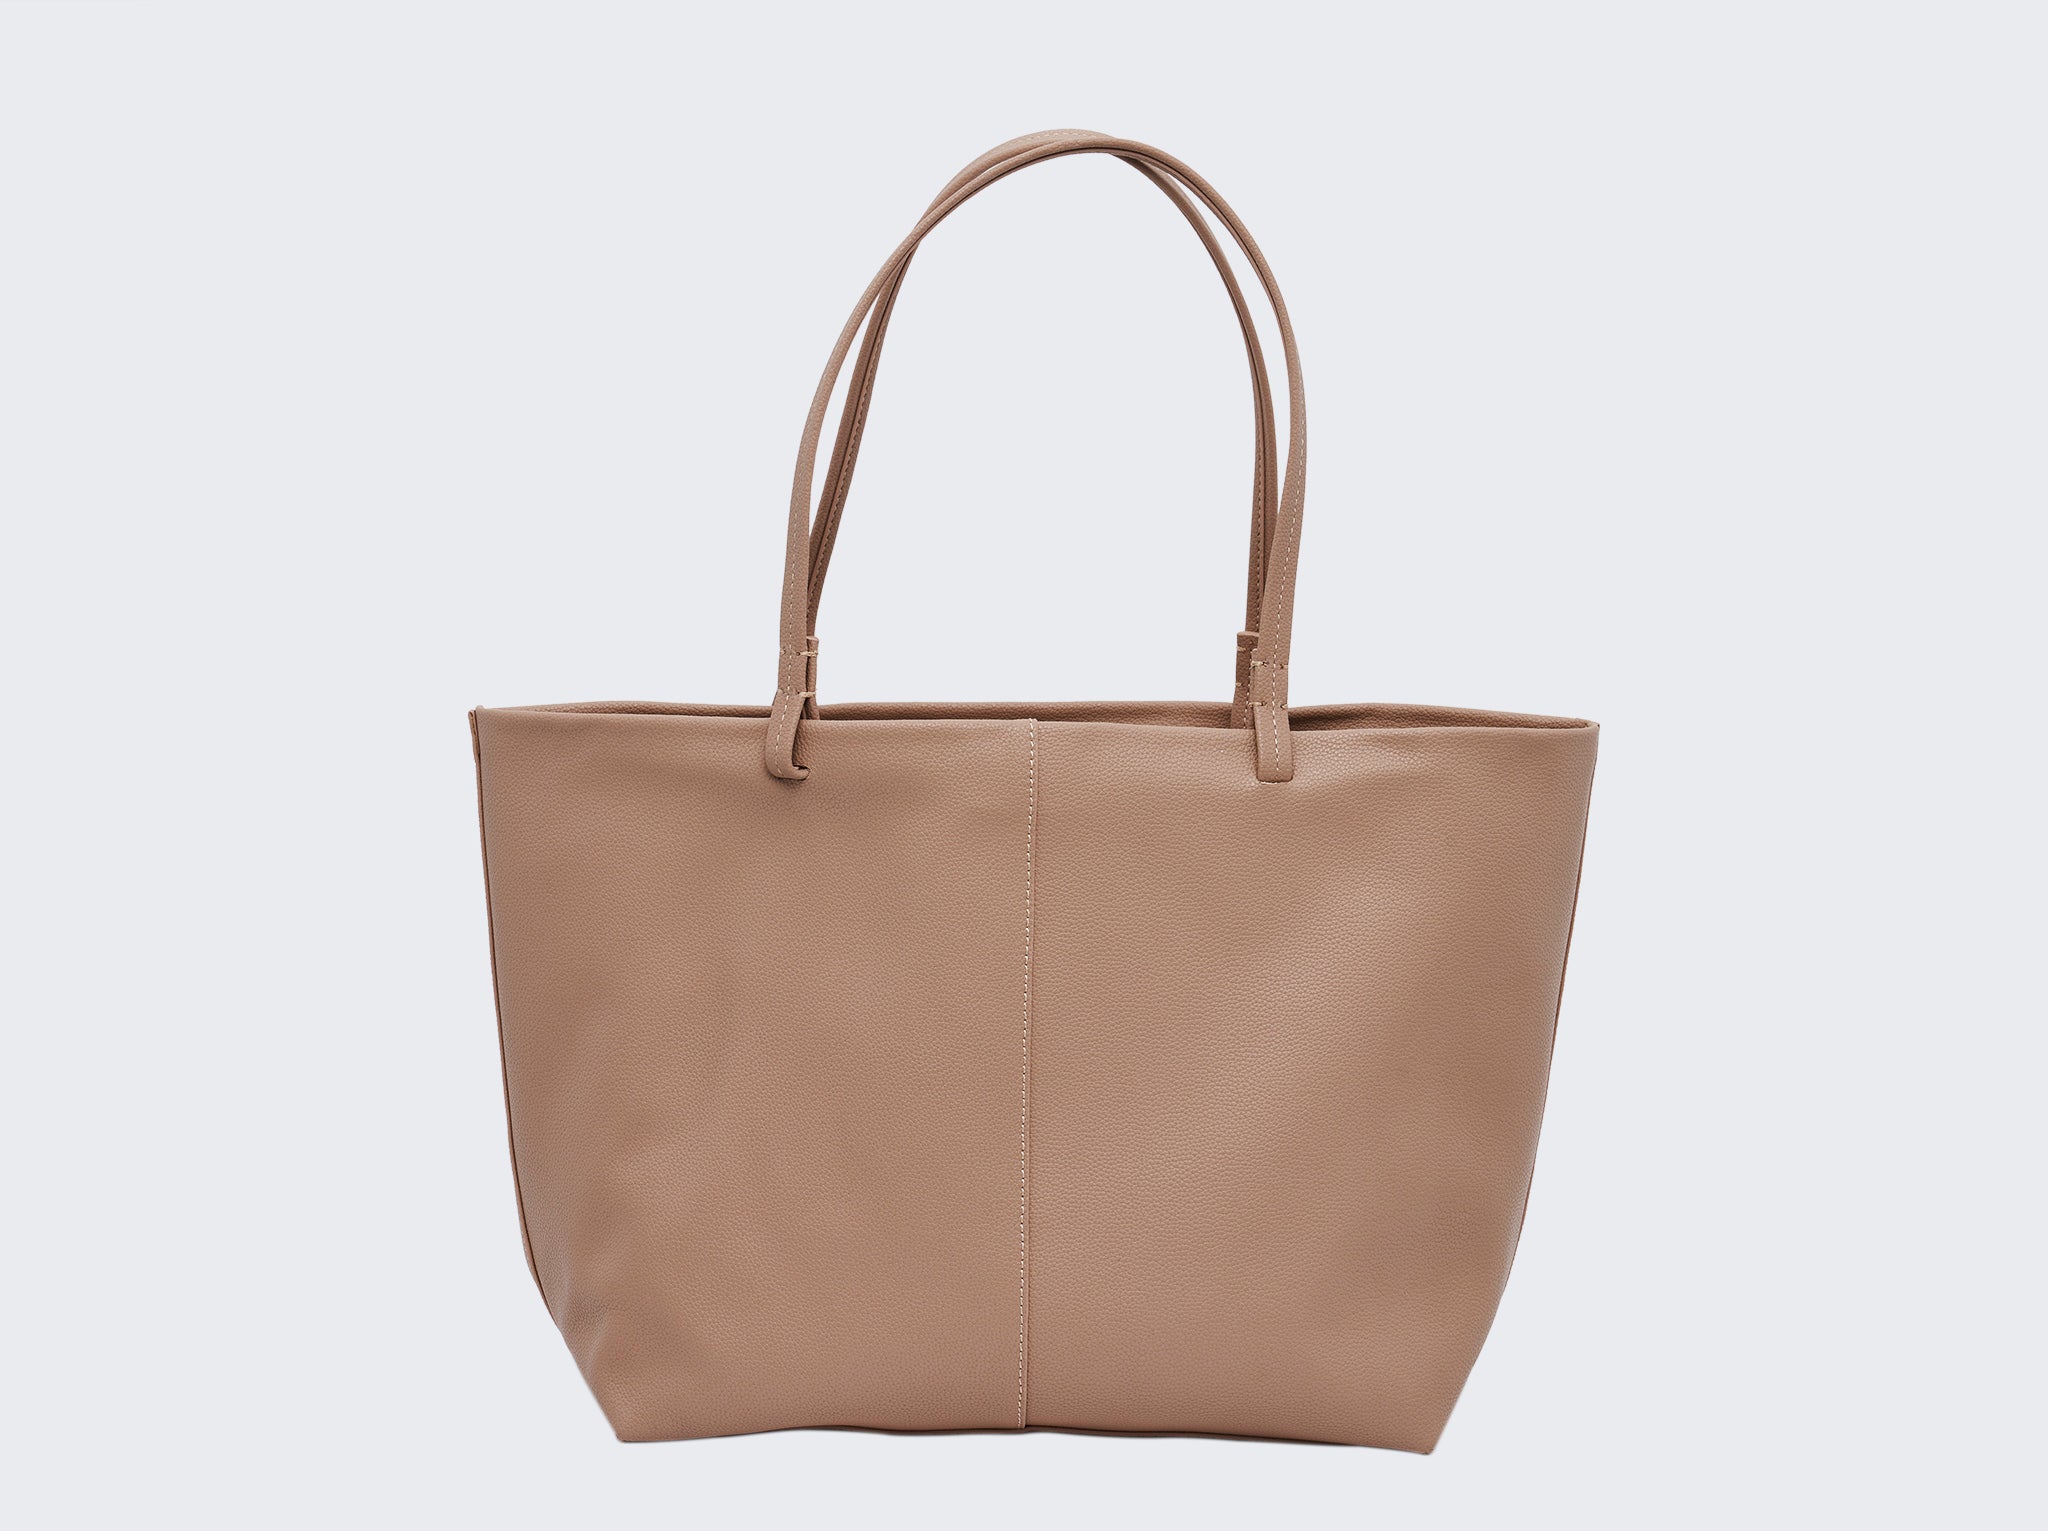 The Aveline Leather Tote